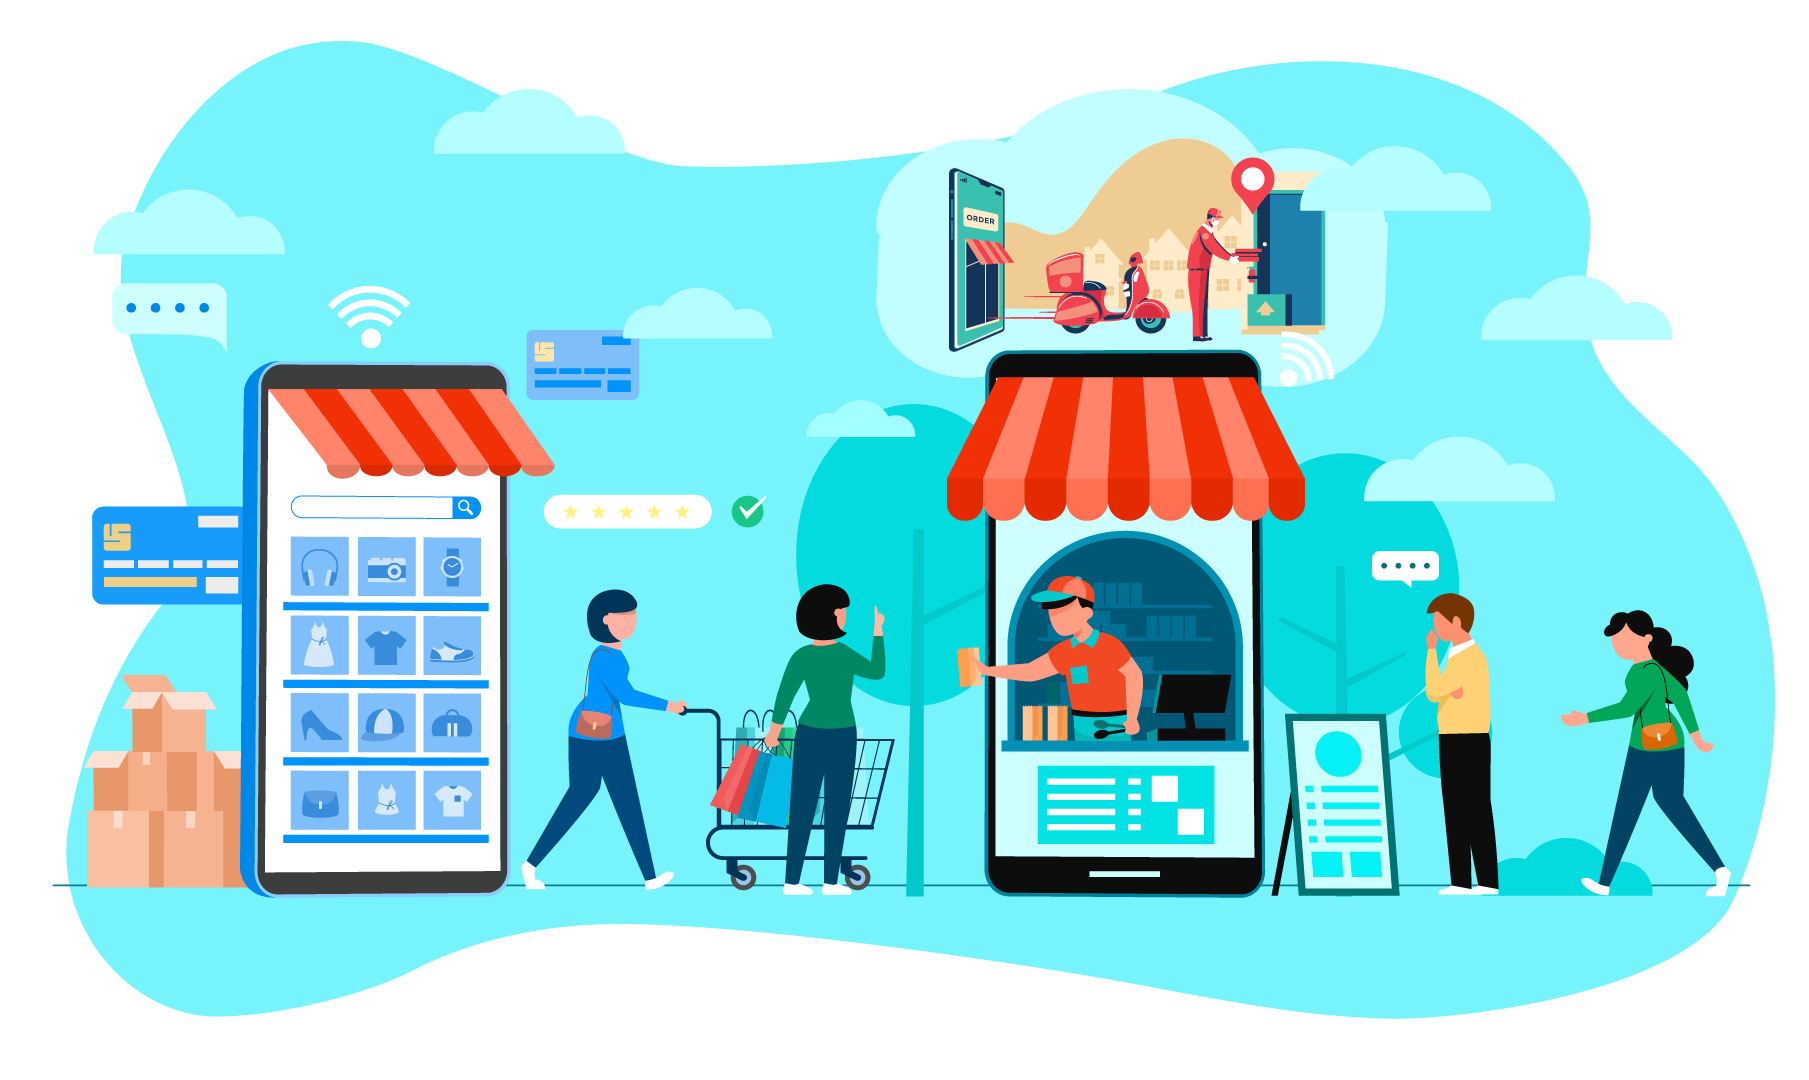 HOW GROCERY DELIVERY APP BENEFITS GROCERY STORES TO EXPAND THEIR BUSINESS?